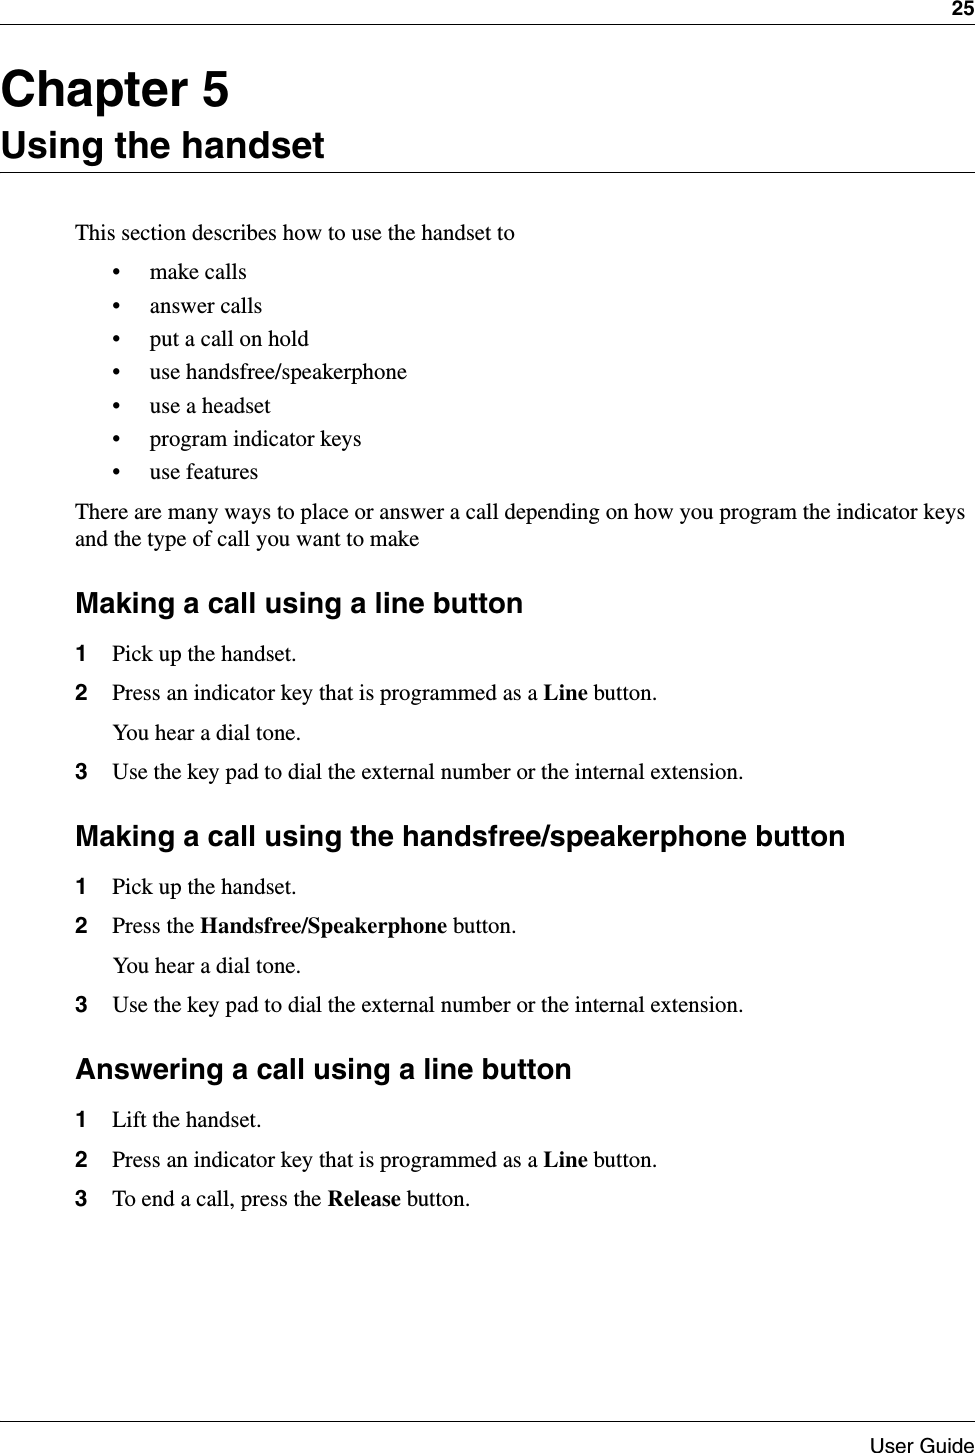 25User GuideChapter 5Using the handsetThis section describes how to use the handset to• make calls• answer calls• put a call on hold• use handsfree/speakerphone• use a headset• program indicator keys• use featuresThere are many ways to place or answer a call depending on how you program the indicator keys and the type of call you want to make Making a call using a line button1Pick up the handset.2Press an indicator key that is programmed as a Line button.You hear a dial tone.3Use the key pad to dial the external number or the internal extension.Making a call using the handsfree/speakerphone button1Pick up the handset.2Press the Handsfree/Speakerphone button.You hear a dial tone.3Use the key pad to dial the external number or the internal extension.Answering a call using a line button1Lift the handset.2Press an indicator key that is programmed as a Line button.3To end a call, press the Release button.